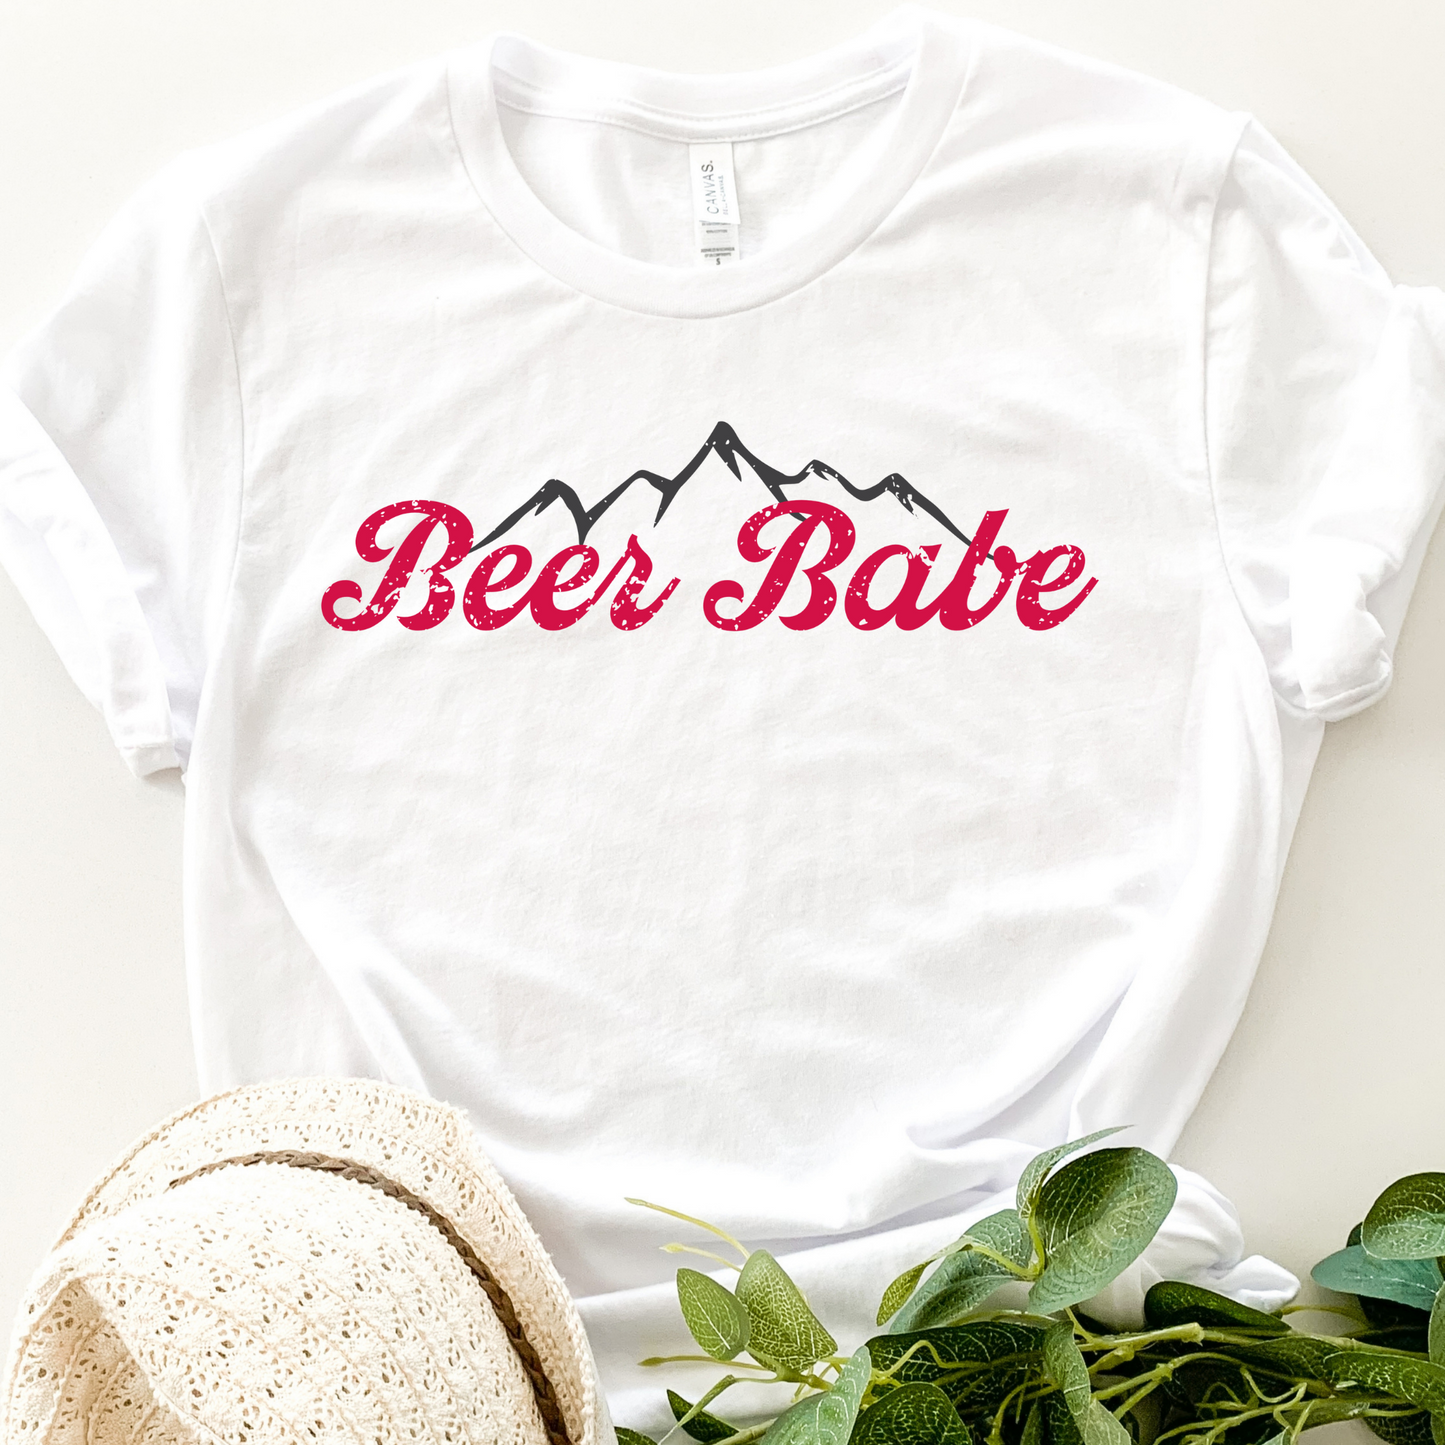 Beer Babe Short Sleeve Essential T Shirt - White